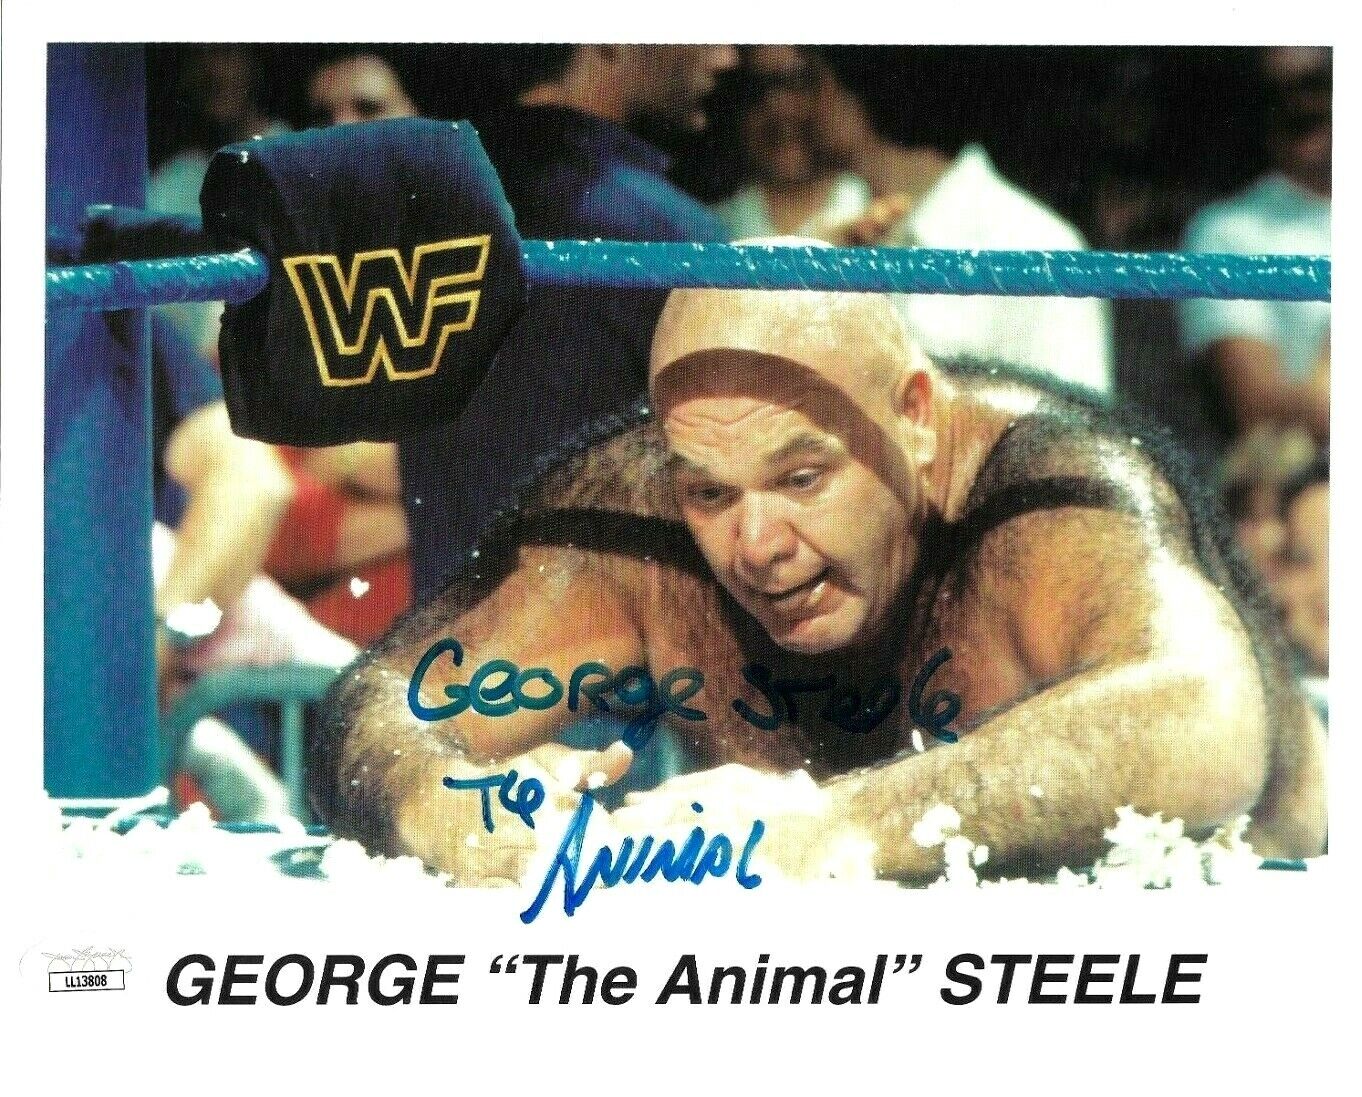 WWE GEORGE STEELE HAND SIGNED AUTOGRAPHED WRESTLING 8X10 Photo Poster painting WITH JSA COA RARE